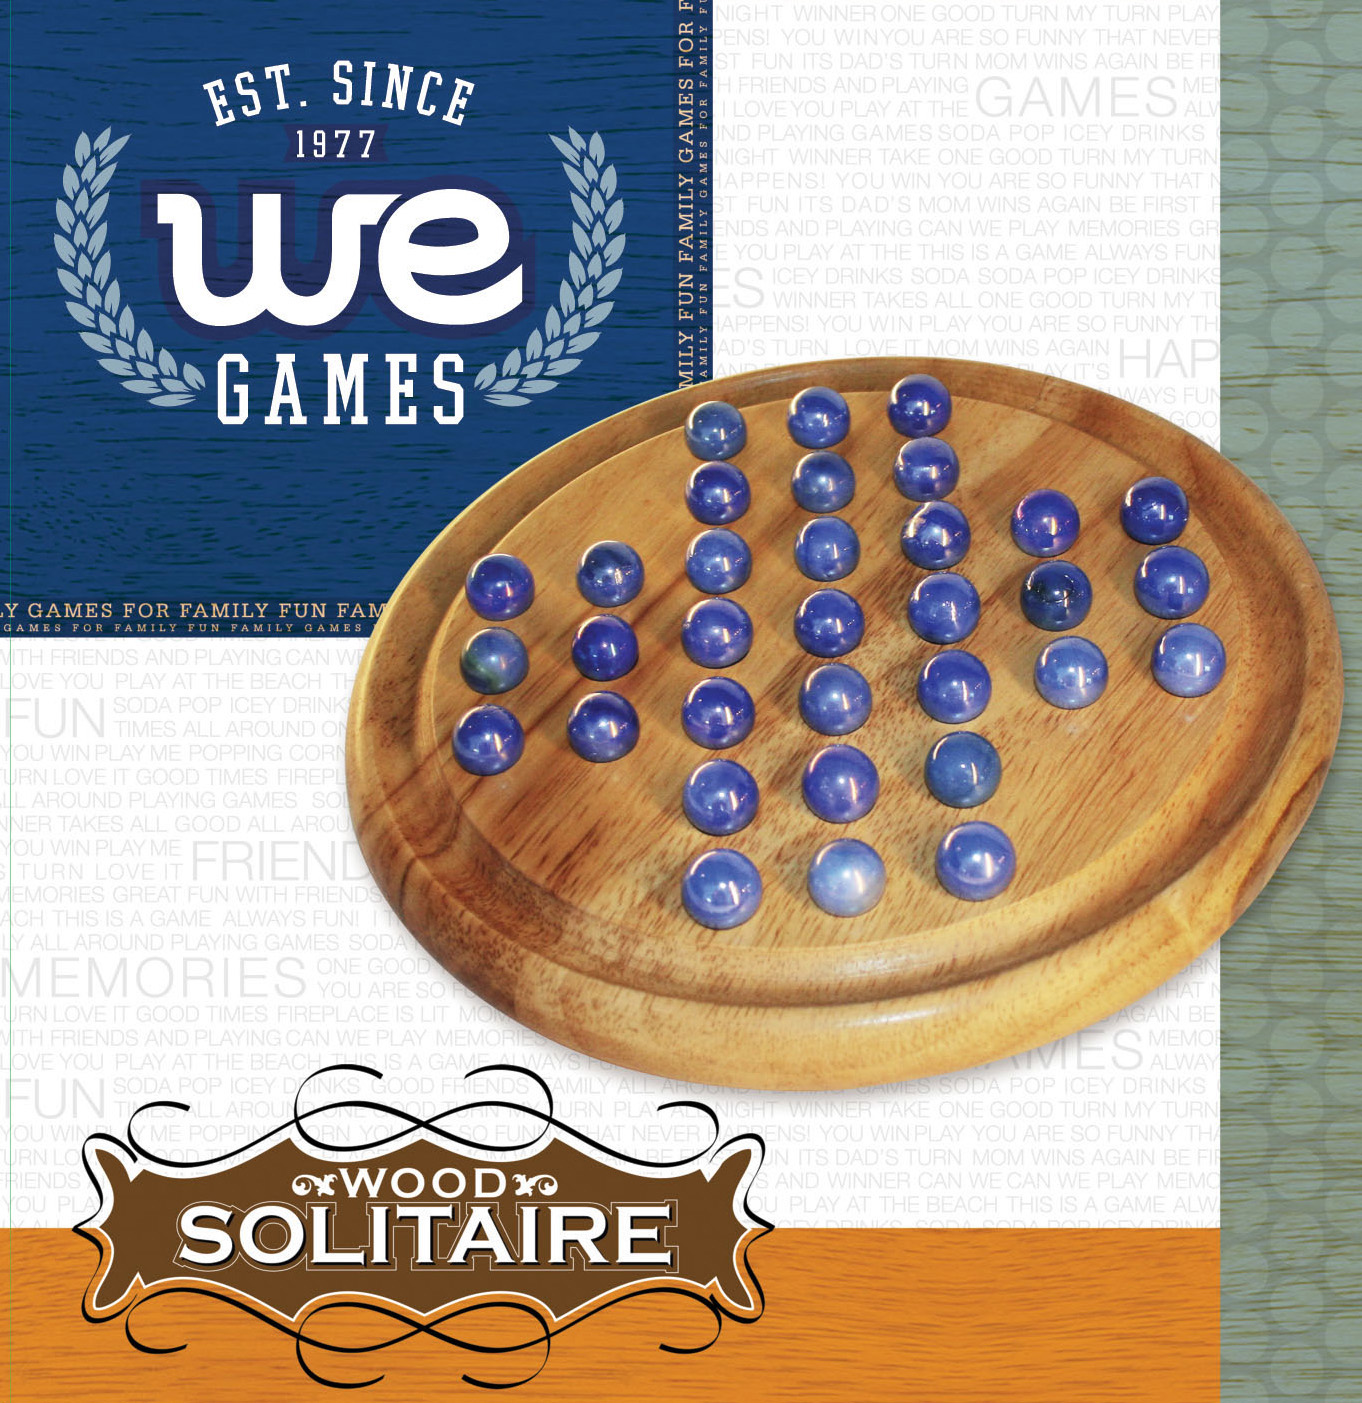 Solid Wood Solitaire with Blue Glass Marbles - 8.875 in. Diameter